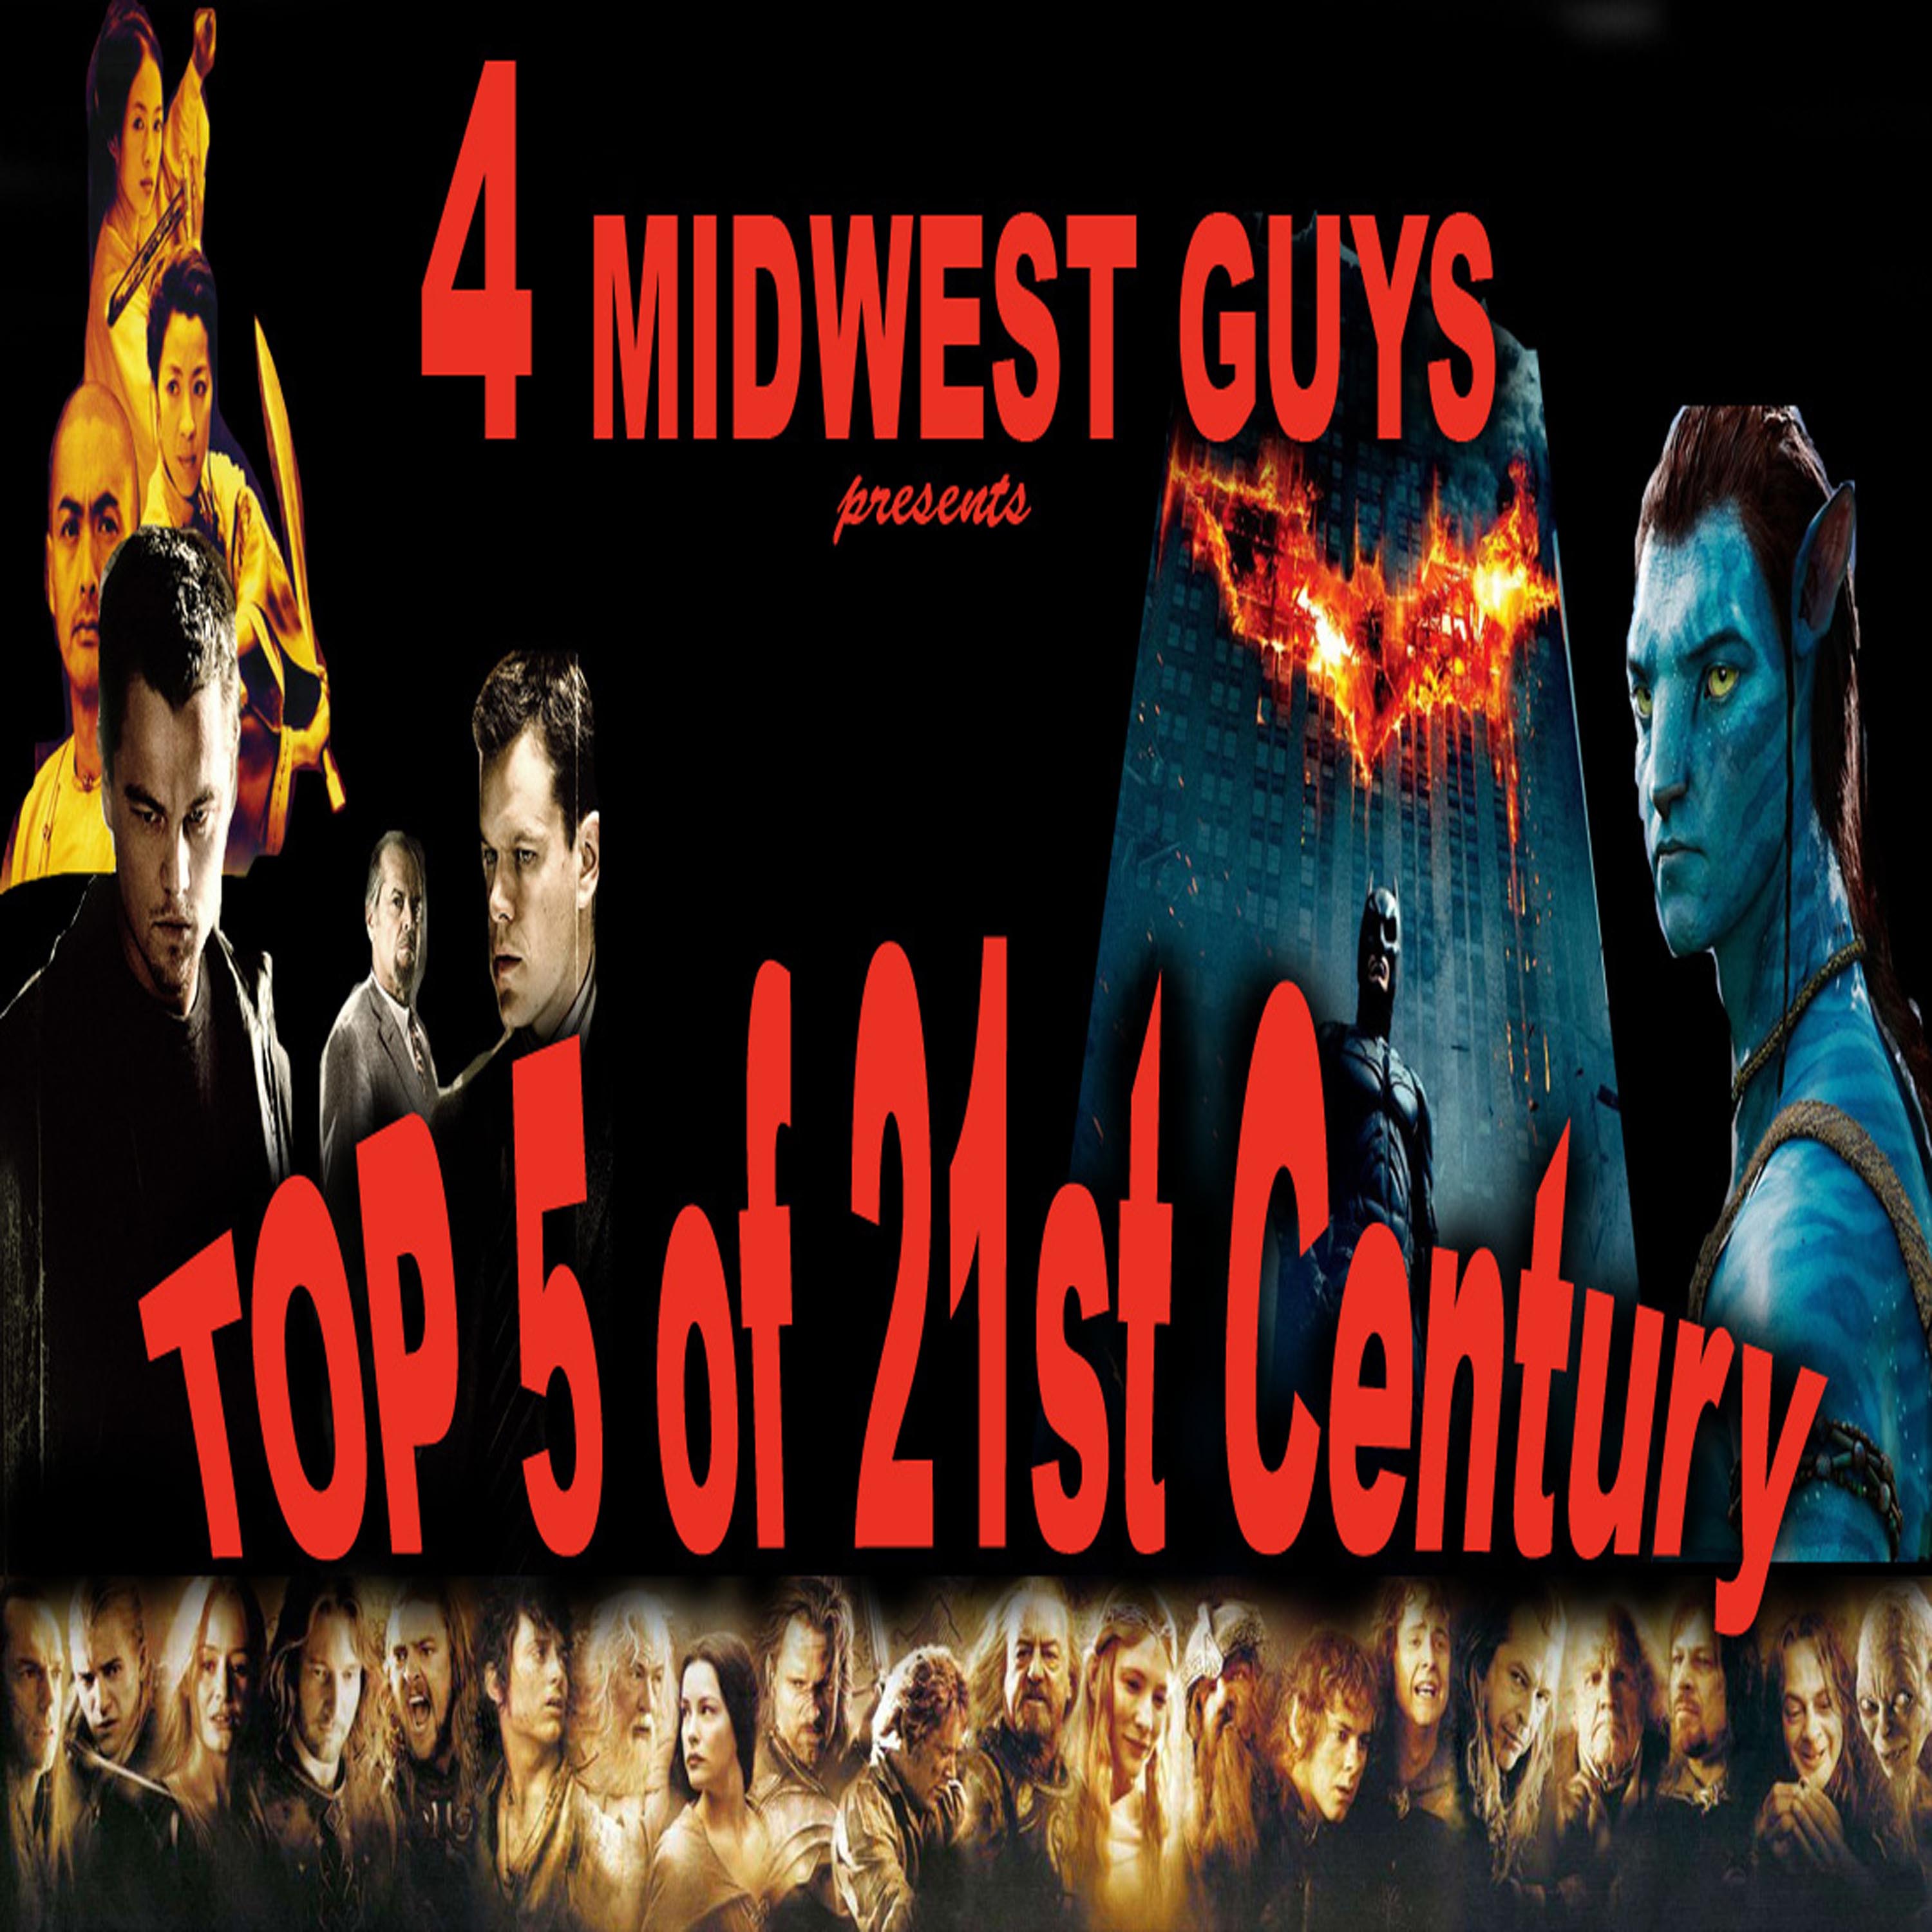 4 MIDWEST GUYS PRESENTS TOP 5 MOVIES OF THE 21ST CENTURY (SO FAR)